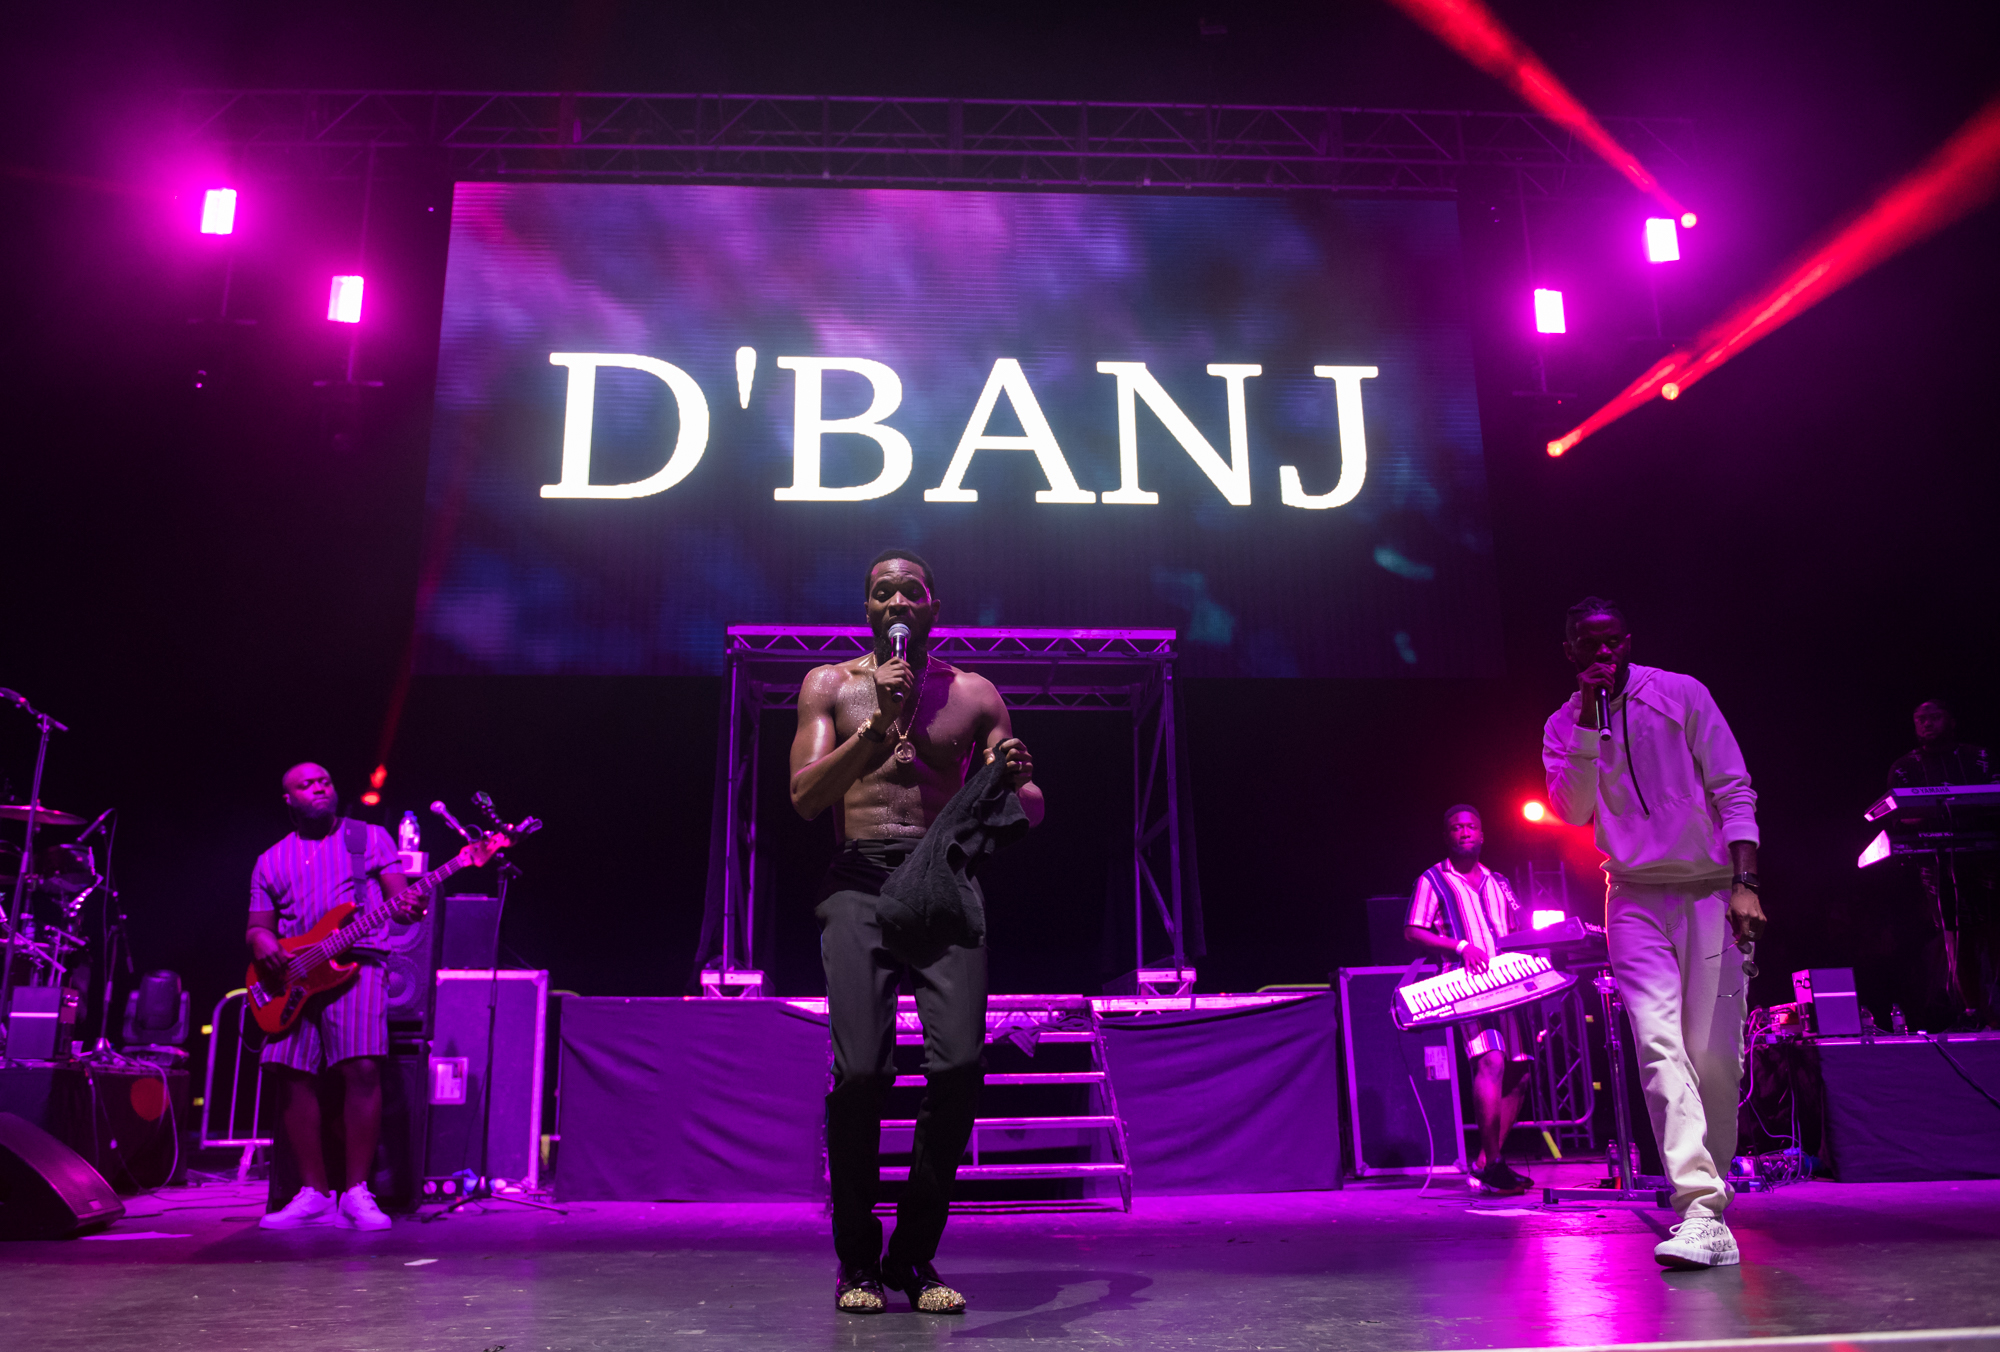 London, United Kingdom. 25th August 2019. Dbanj performing live with Compozers at 02 Academy Brixton during his UK tour.